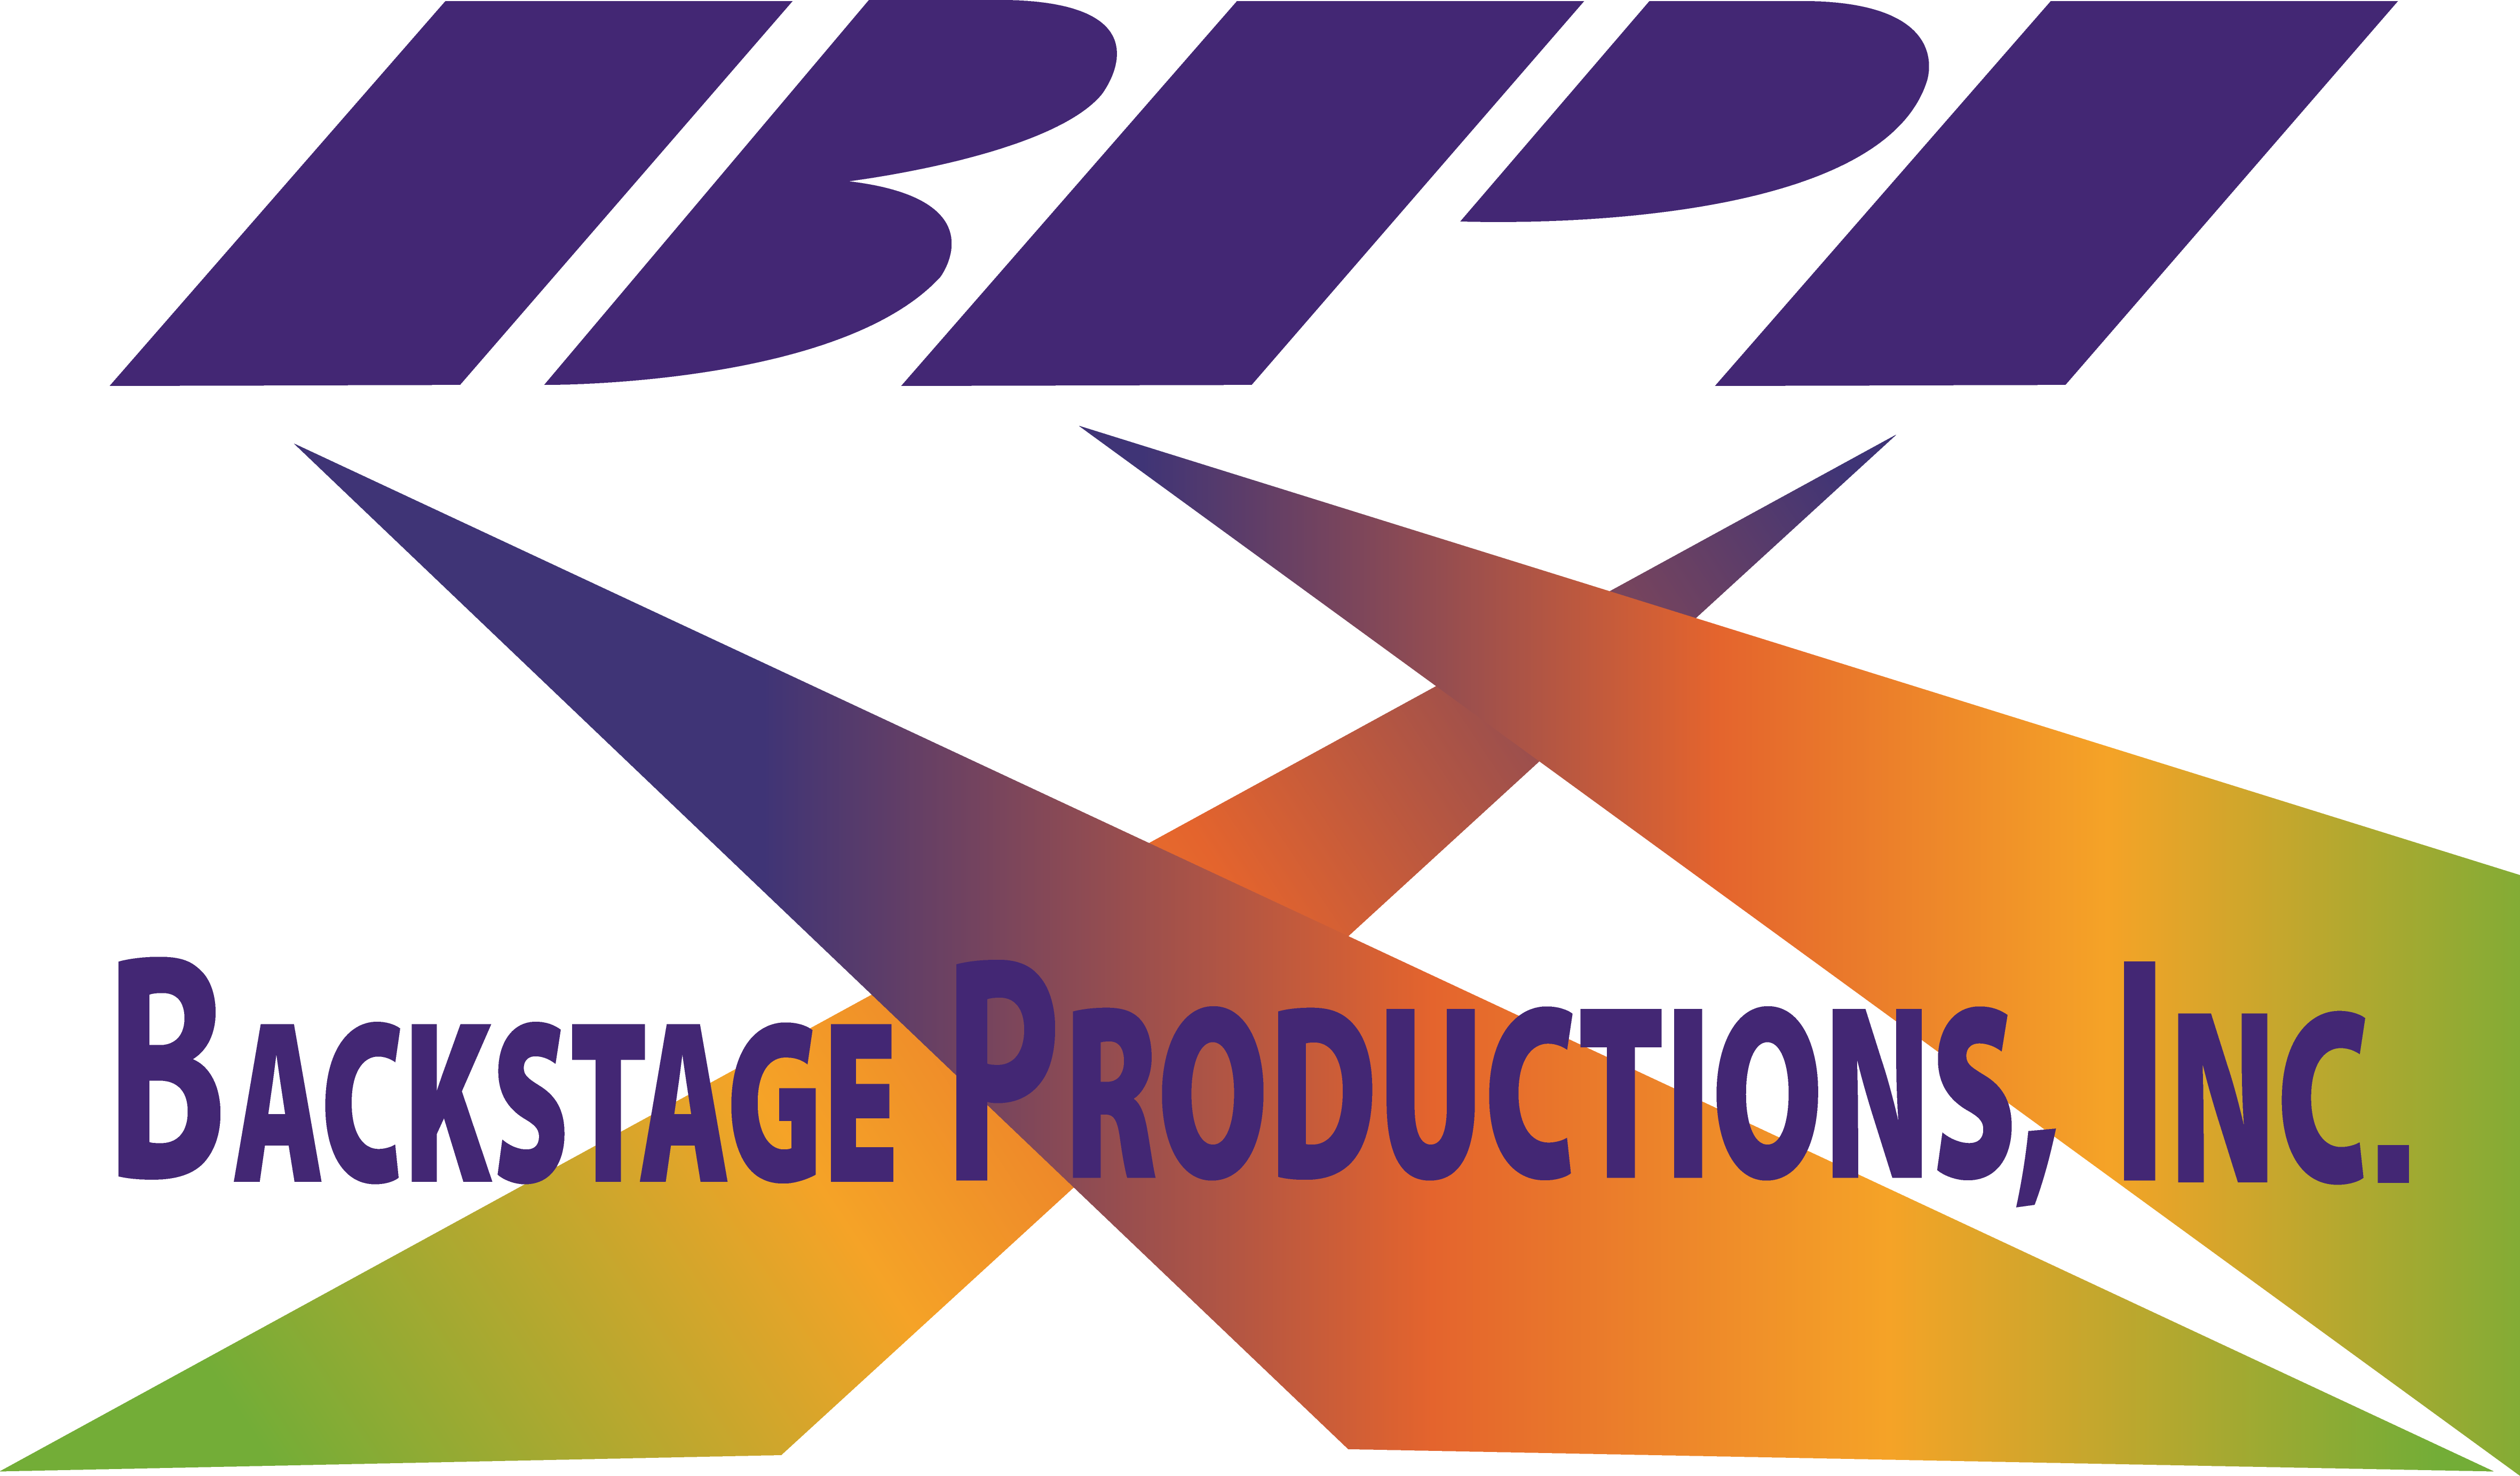 Backstage Productions Inc.